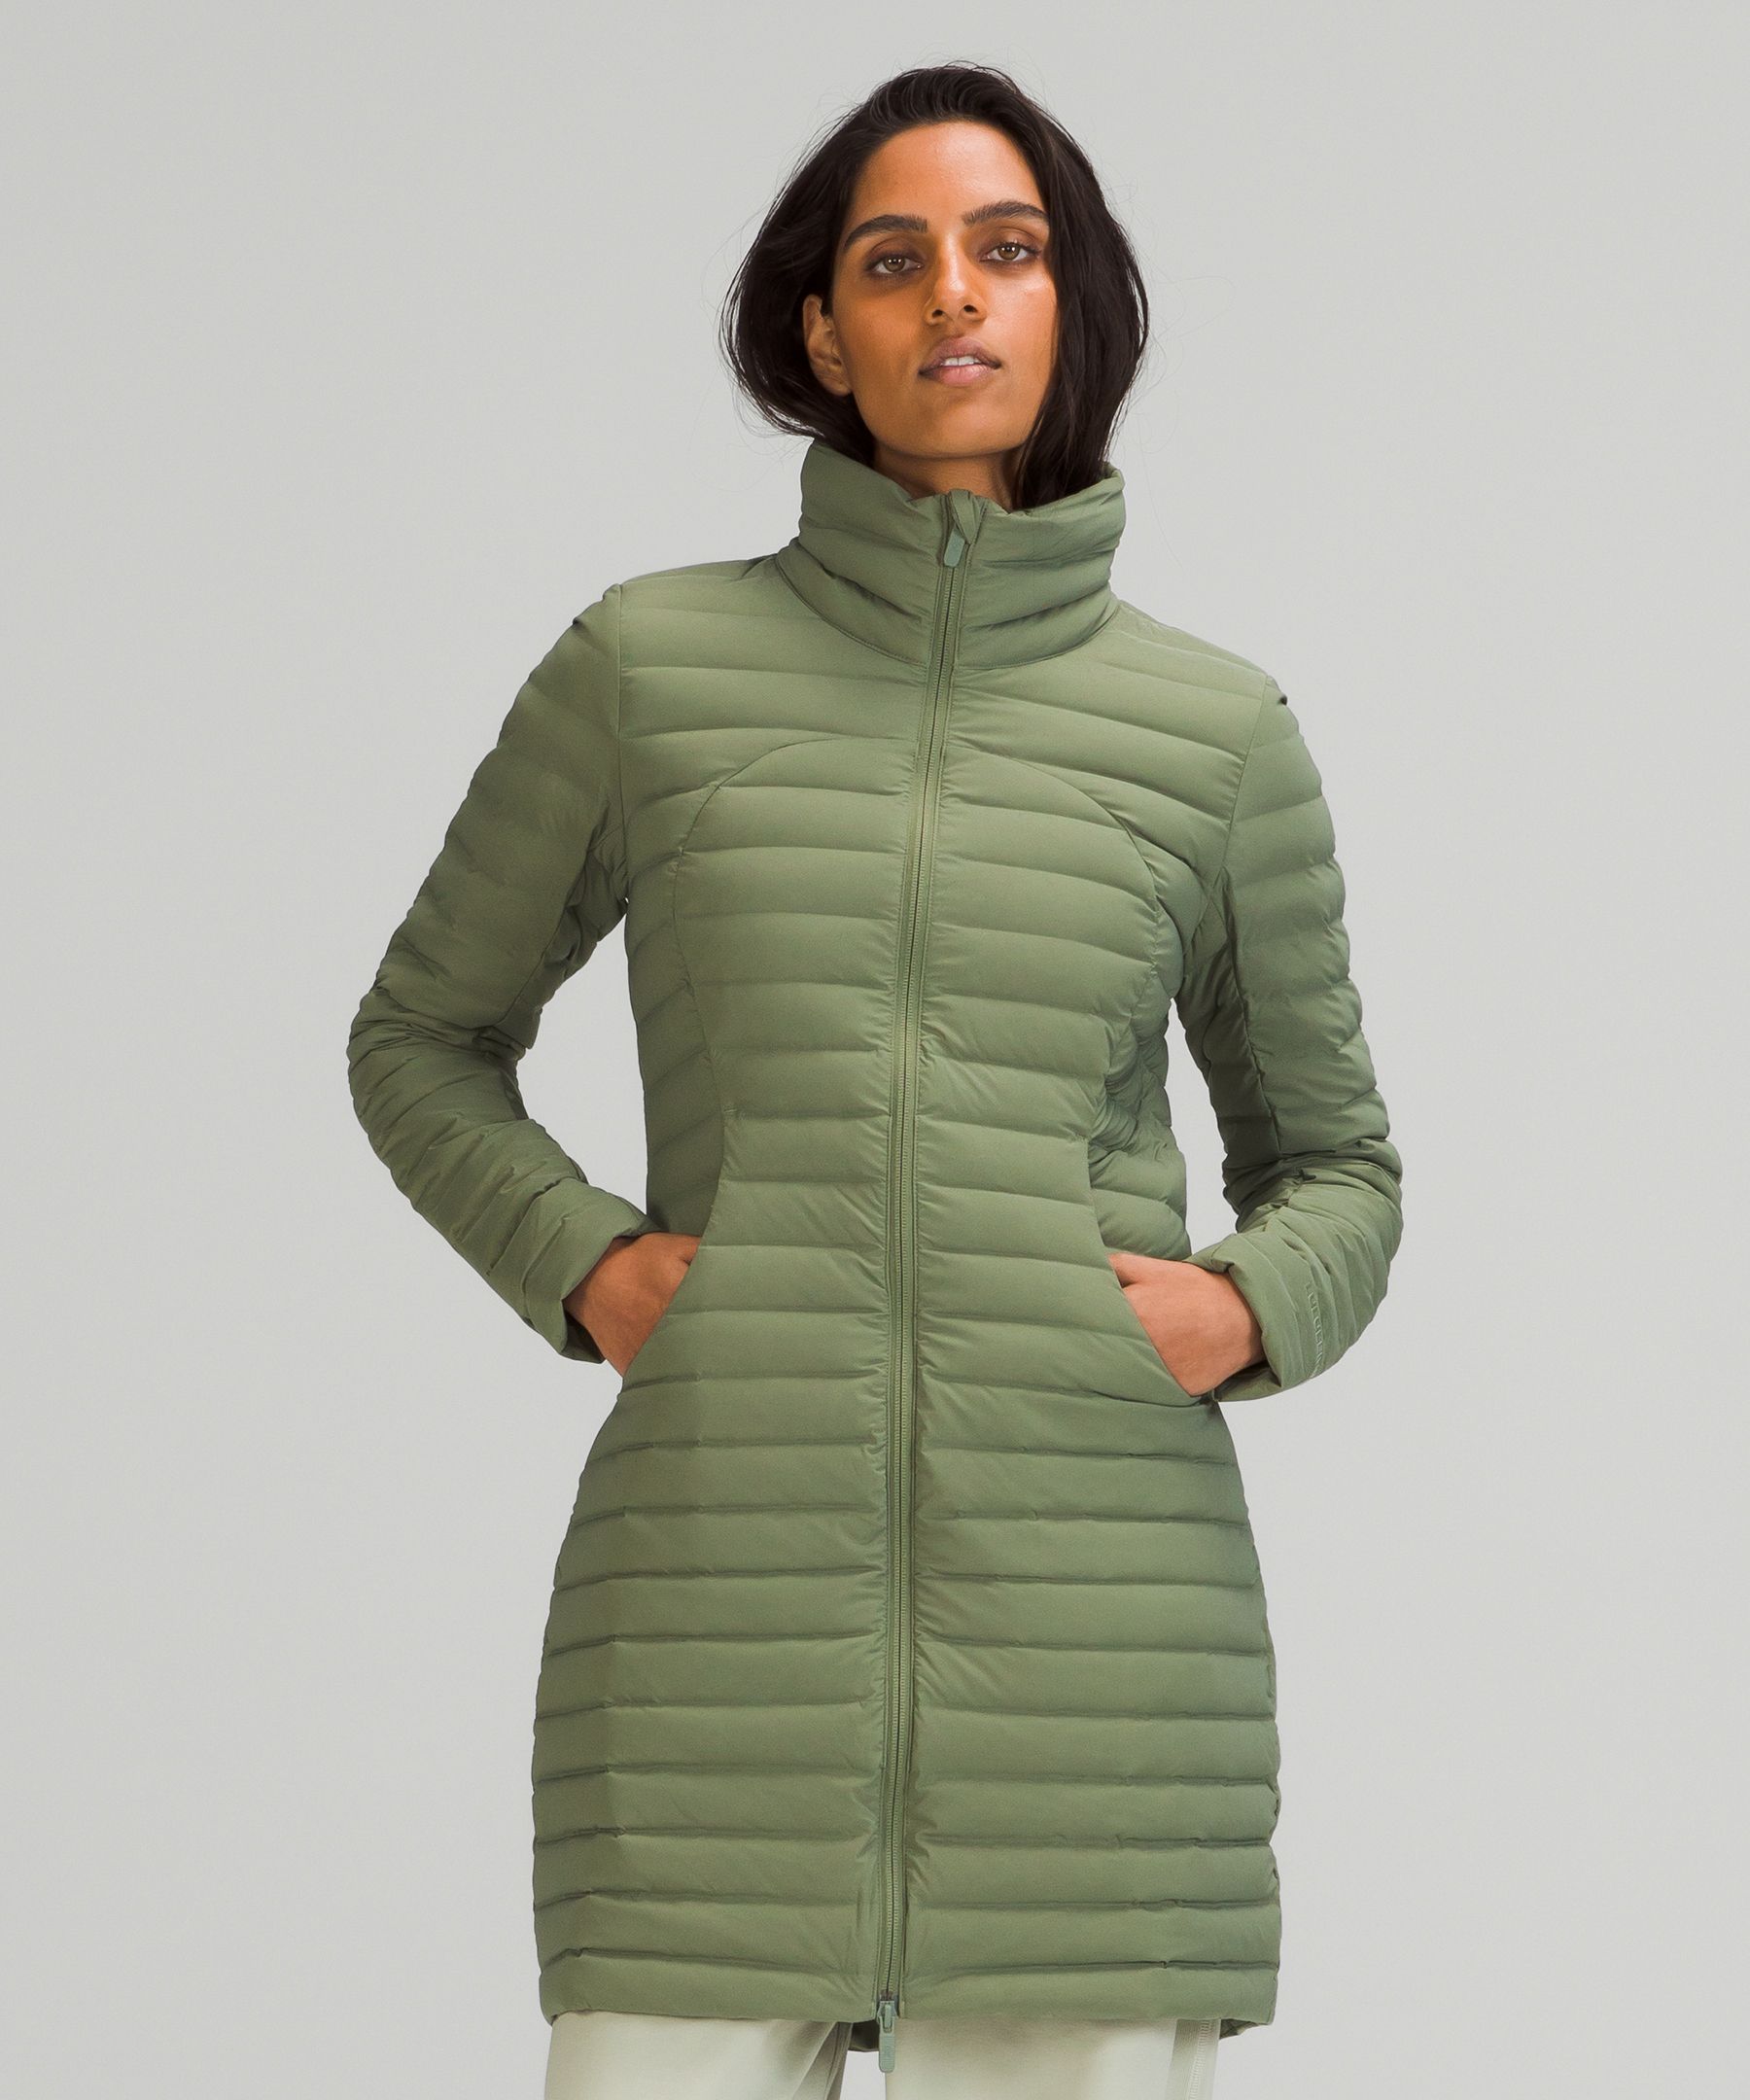 lululemon pack it down again jacket - OFF-58% >Free Delivery